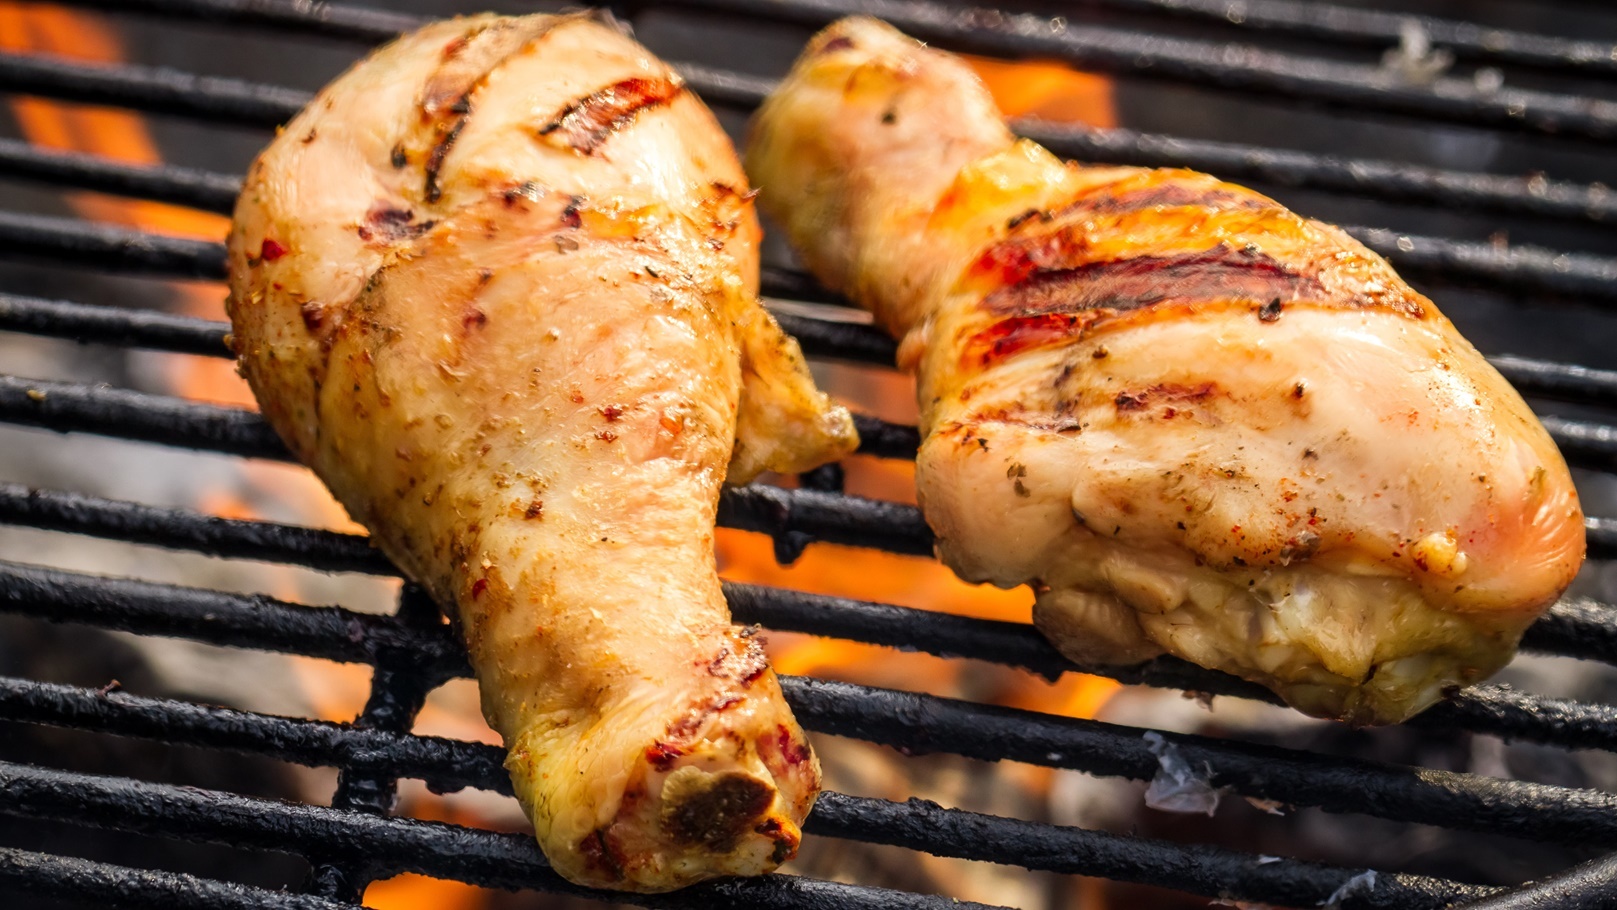 barbecue-chicken-at-summer-on-grill-2022-04-07-03-56-51-utc